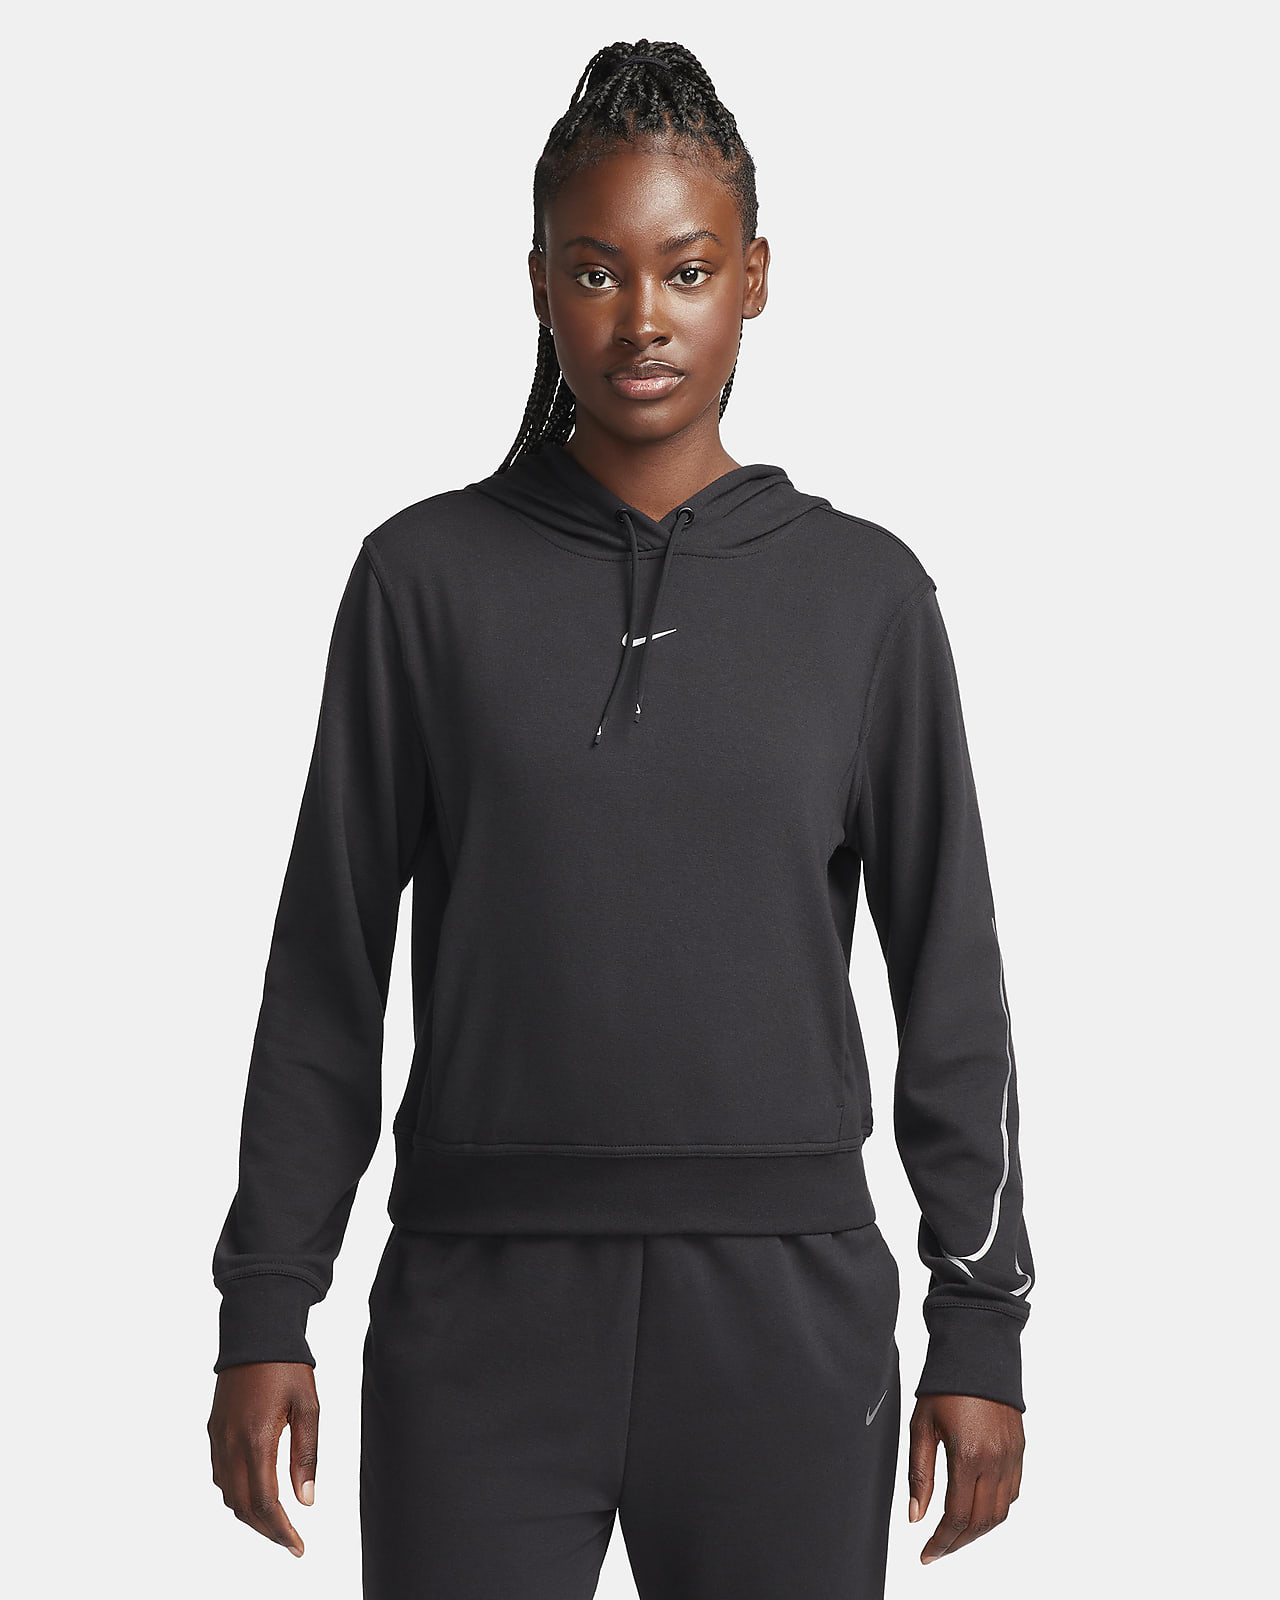 Nike Dri-FIT Hoodie The Nike Dri-FIT Hoodie is made of soft French terry  fabric with sweat-wicking power to help keep you warm and dry when you're  warming up, cooling down or catching